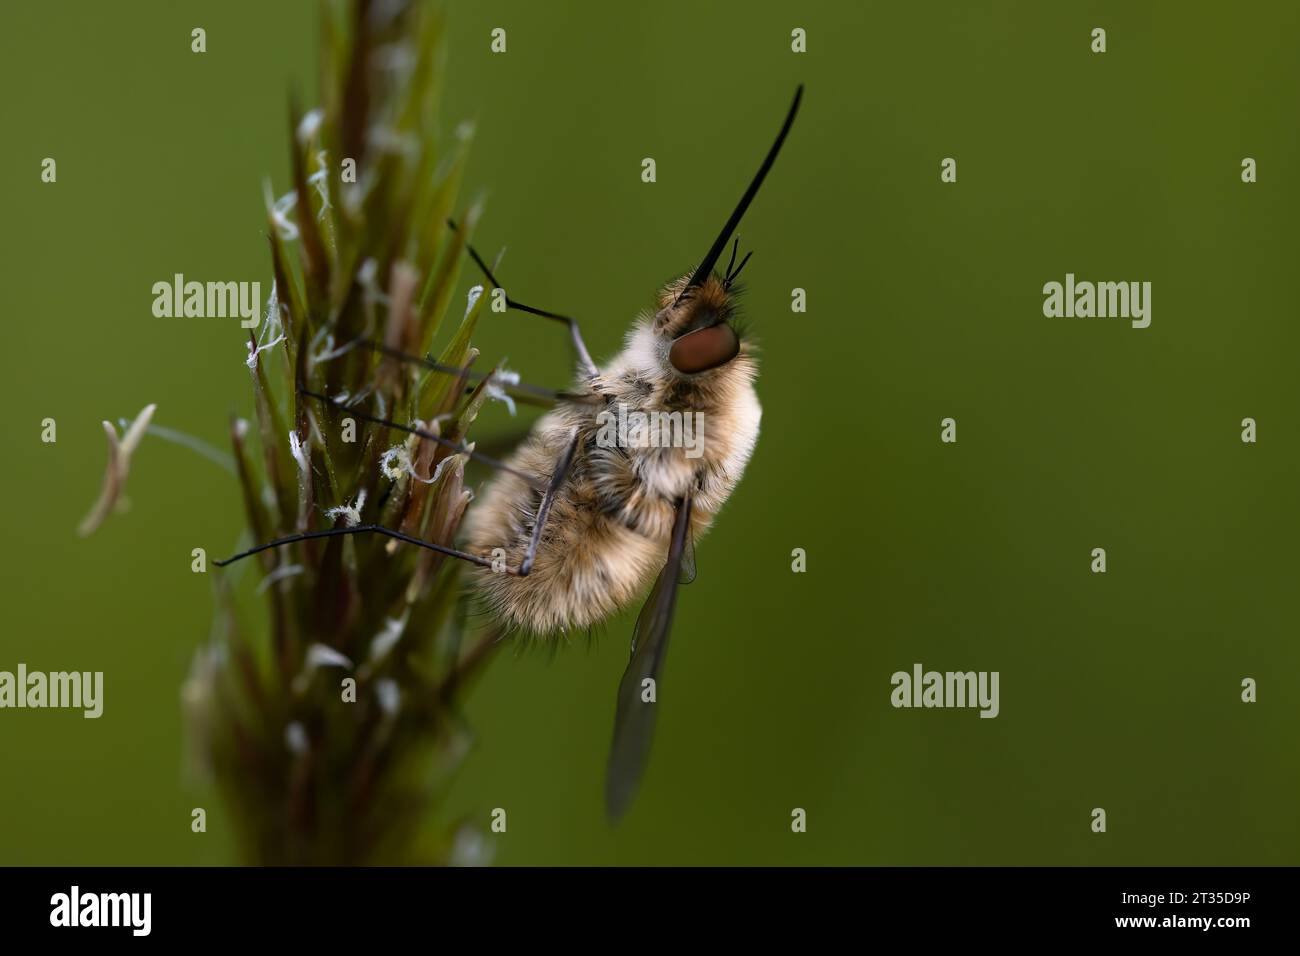 bumble bee fly, bombylyus major, perched on a grass. horizontal macro shot with green background, neat composition. nature, fauna. Copy space. Stock Photo